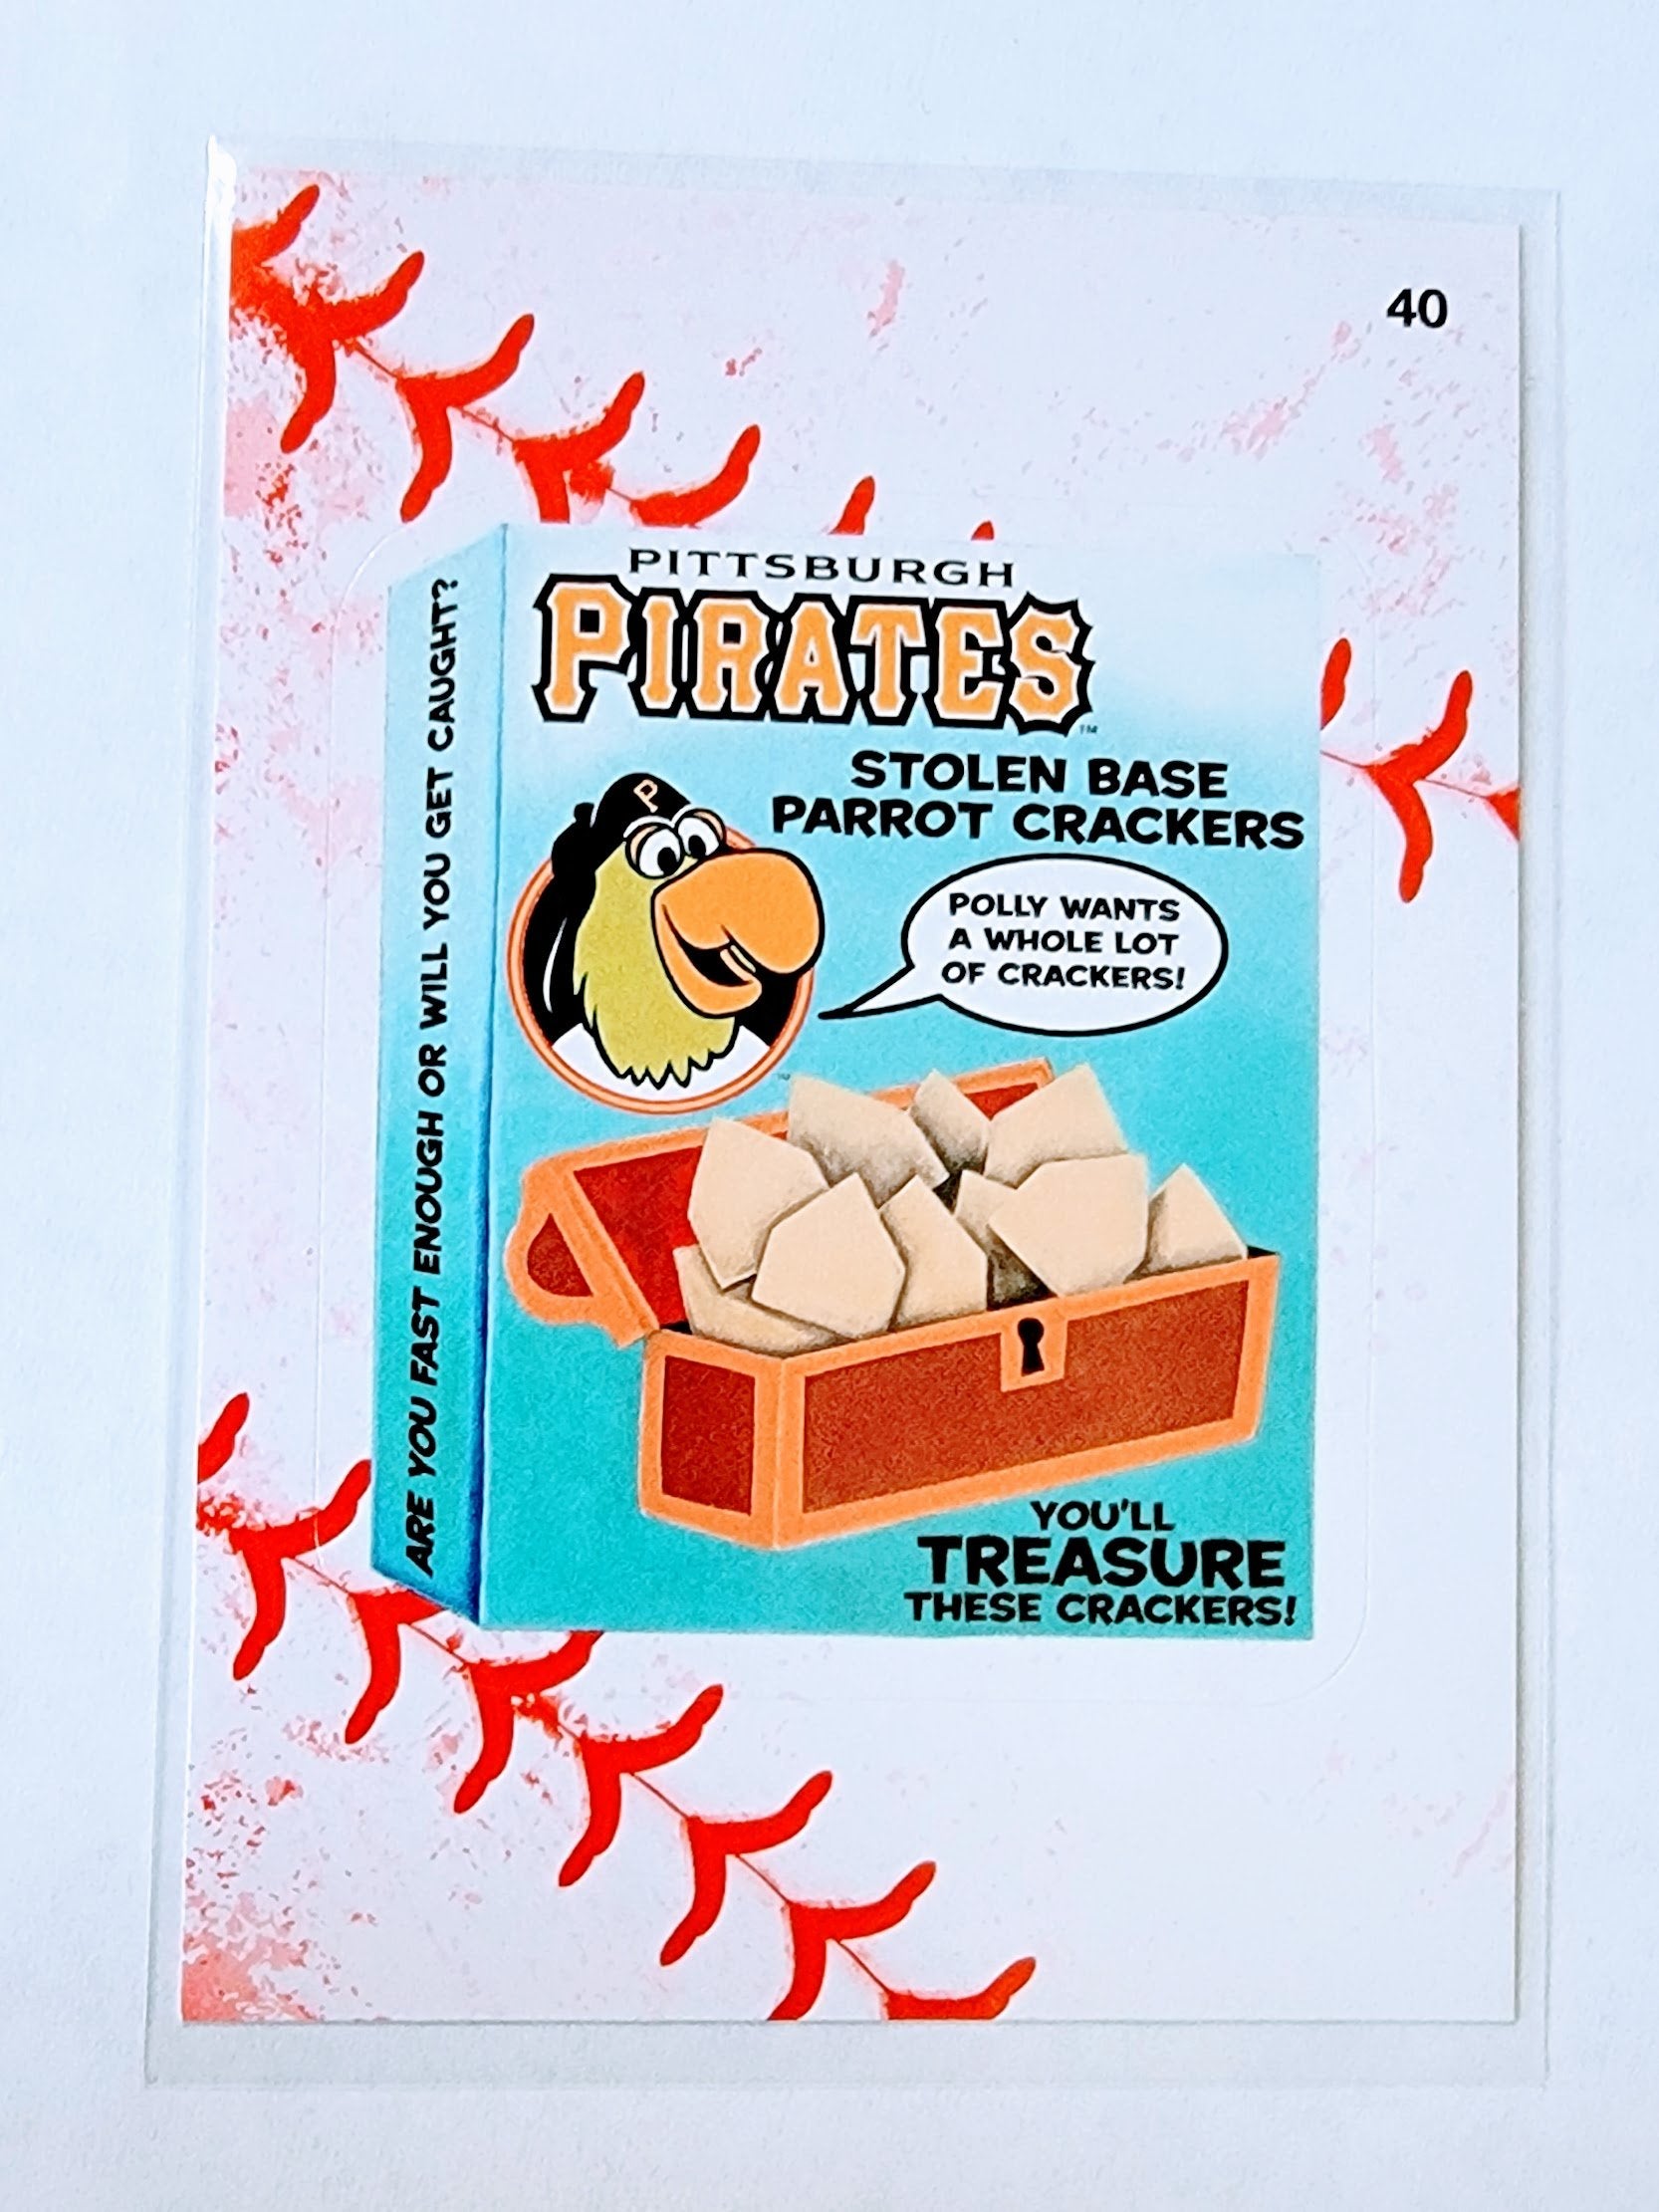 2016 Topps MLB Baseball Wacky Packages Pittsburgh Pirates Stolen Base Parrot Crackers Lace Parallel Sticker Trading Card MCSC1 simple Xclusive Collectibles   